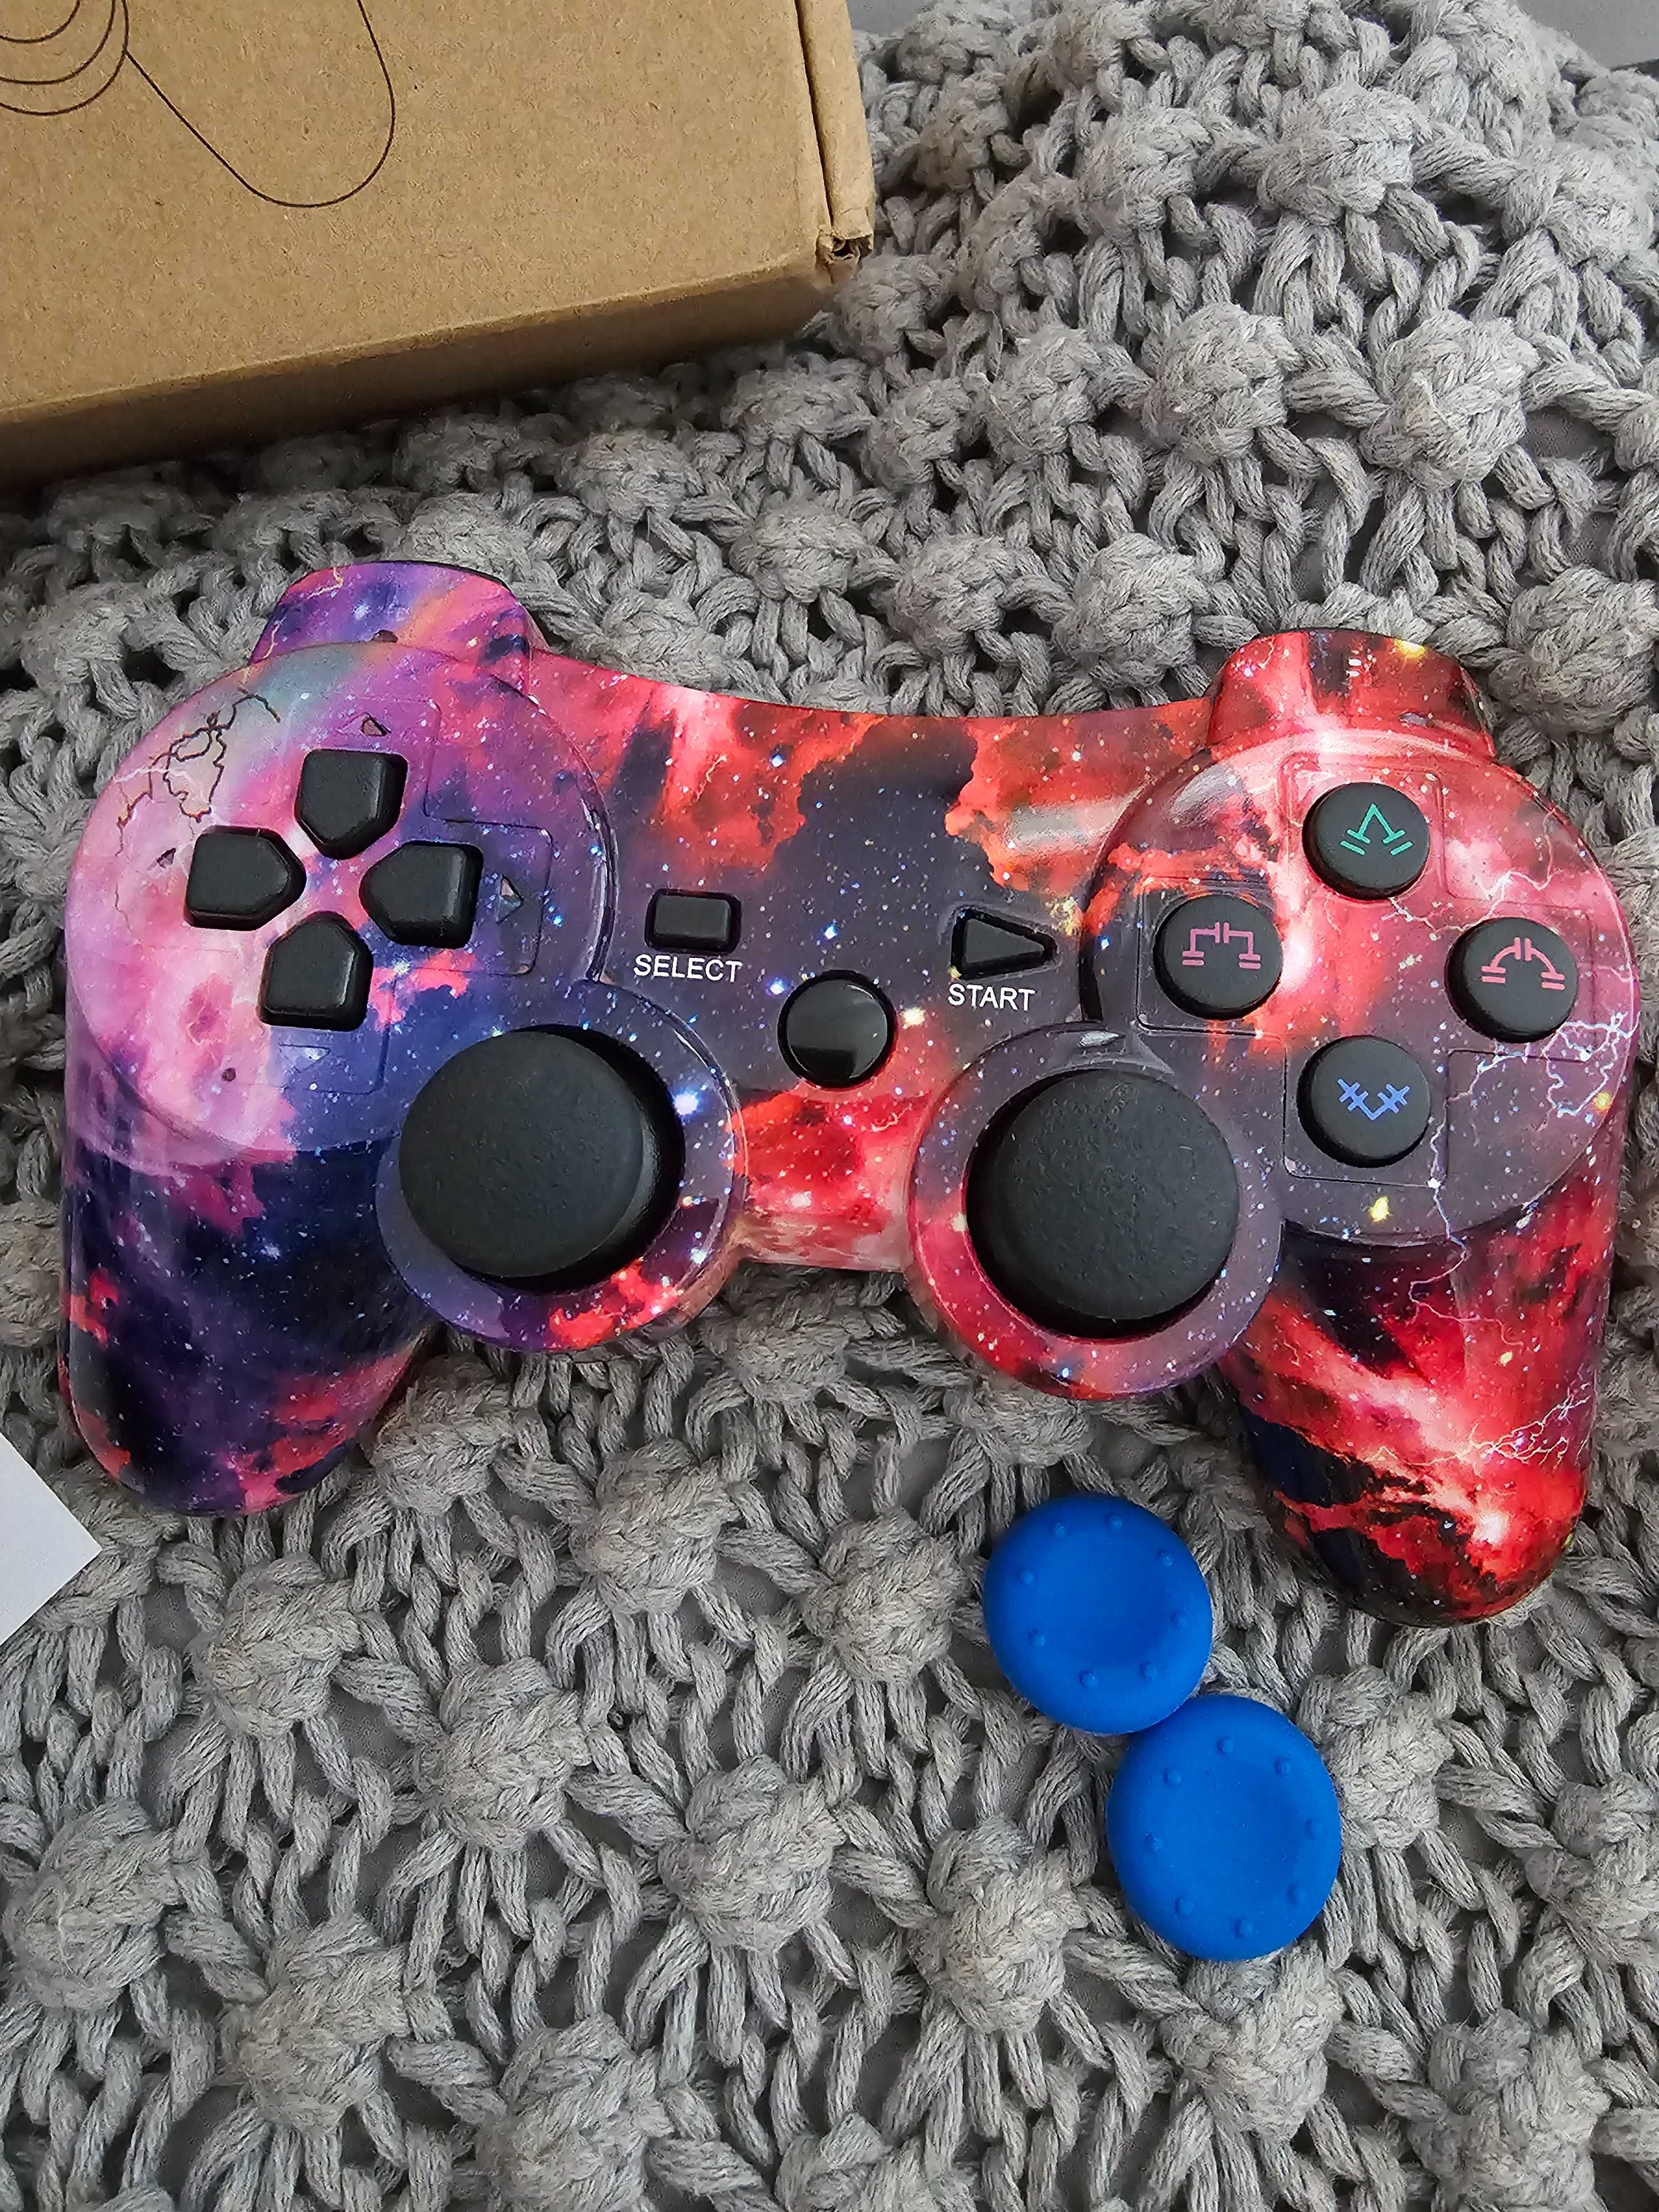 Pad PS3 controller